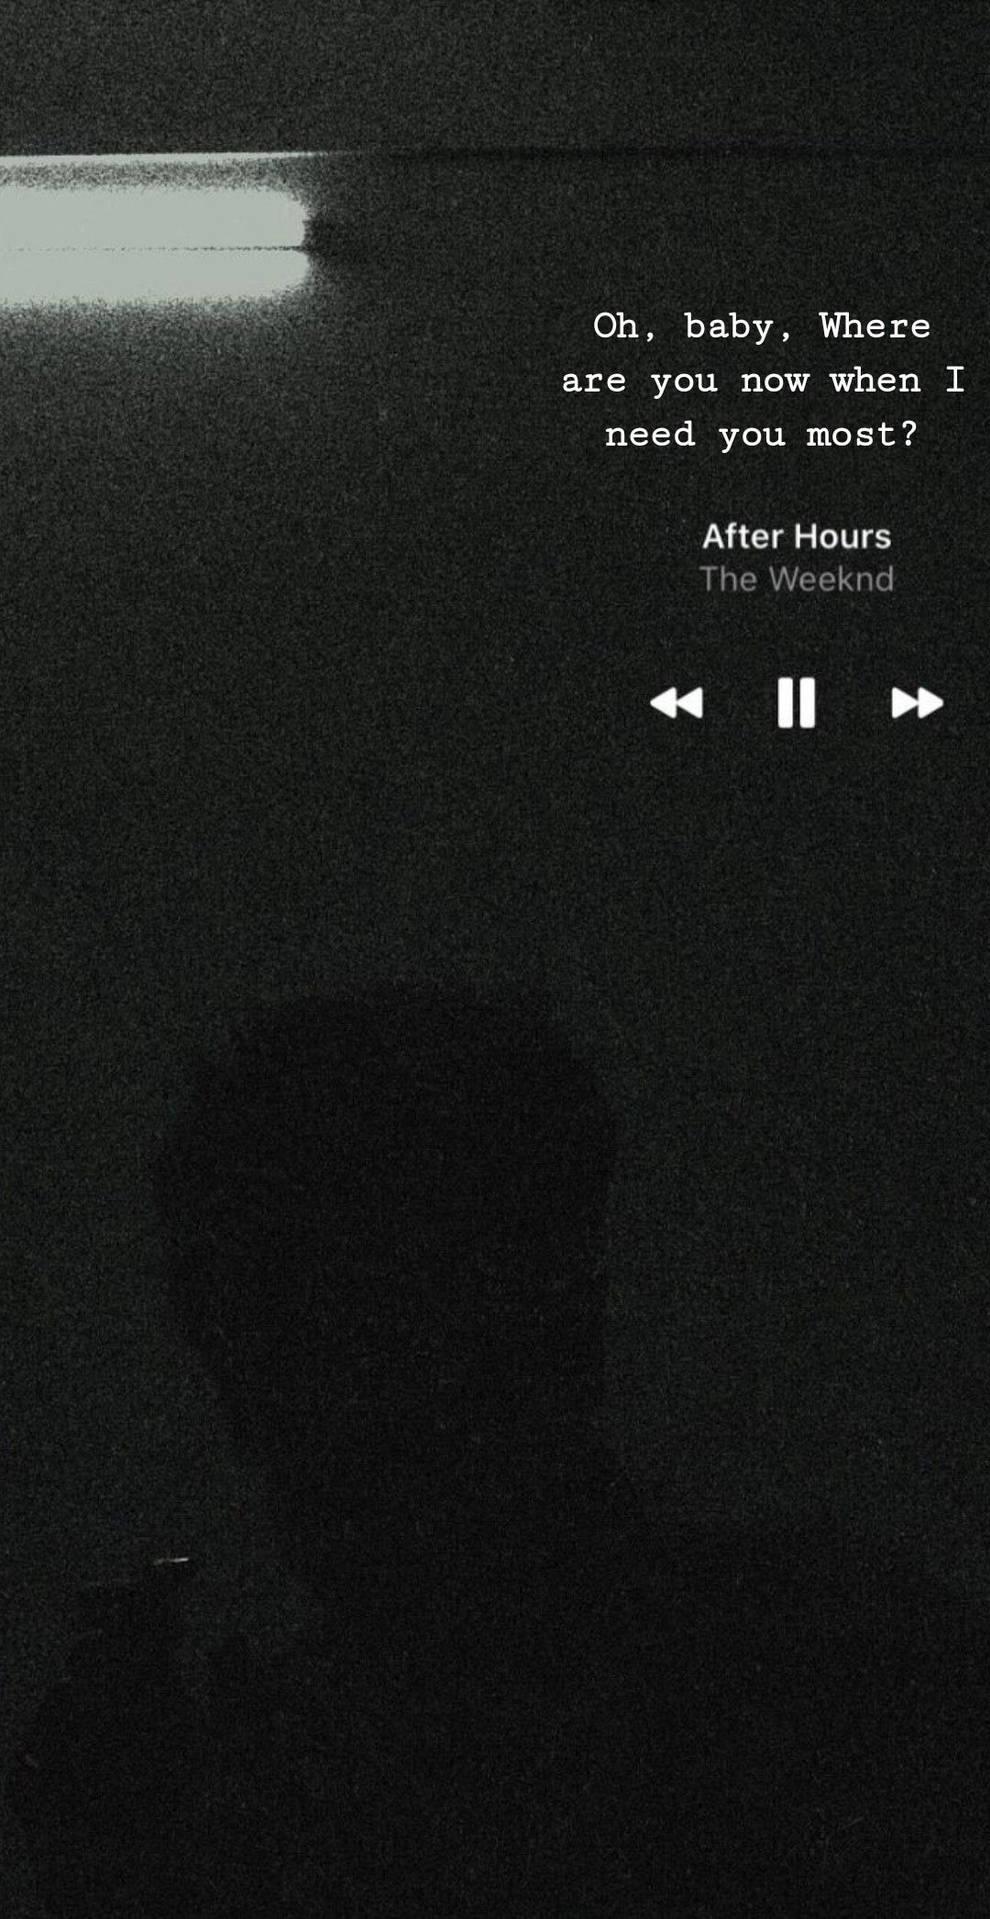 Download The Weeknd After Hours Lyrics Wallpaper